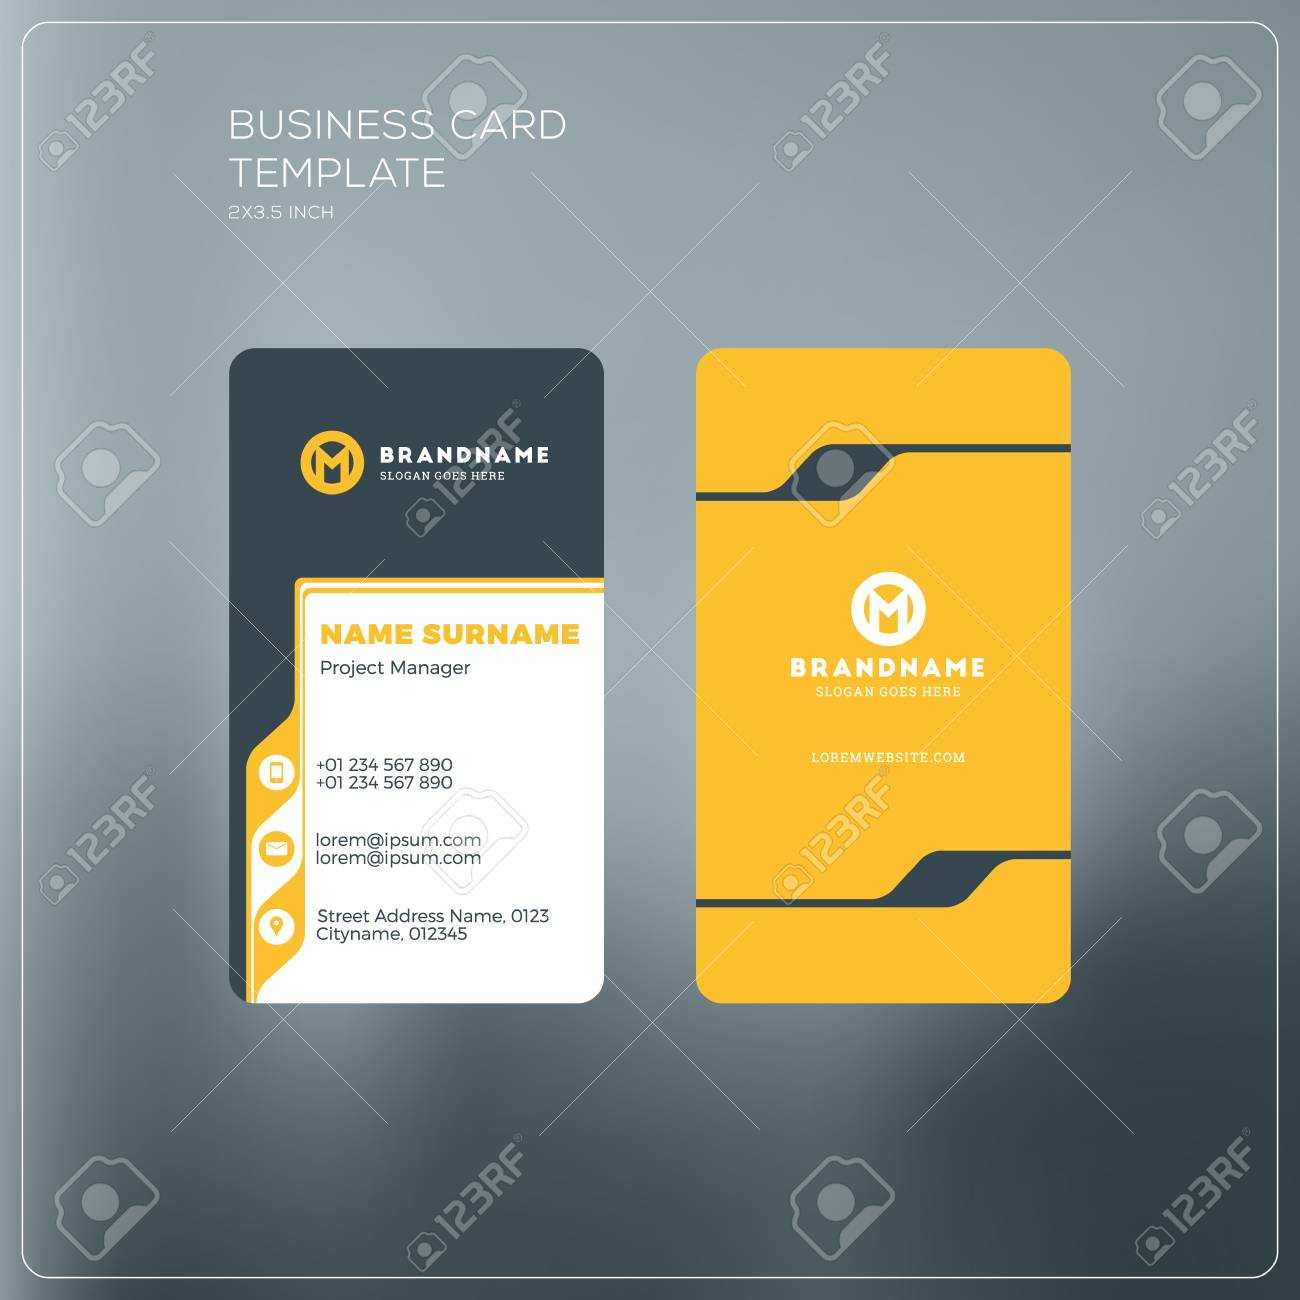 Personal Business Cards Template Pertaining To Pages Business Card Template